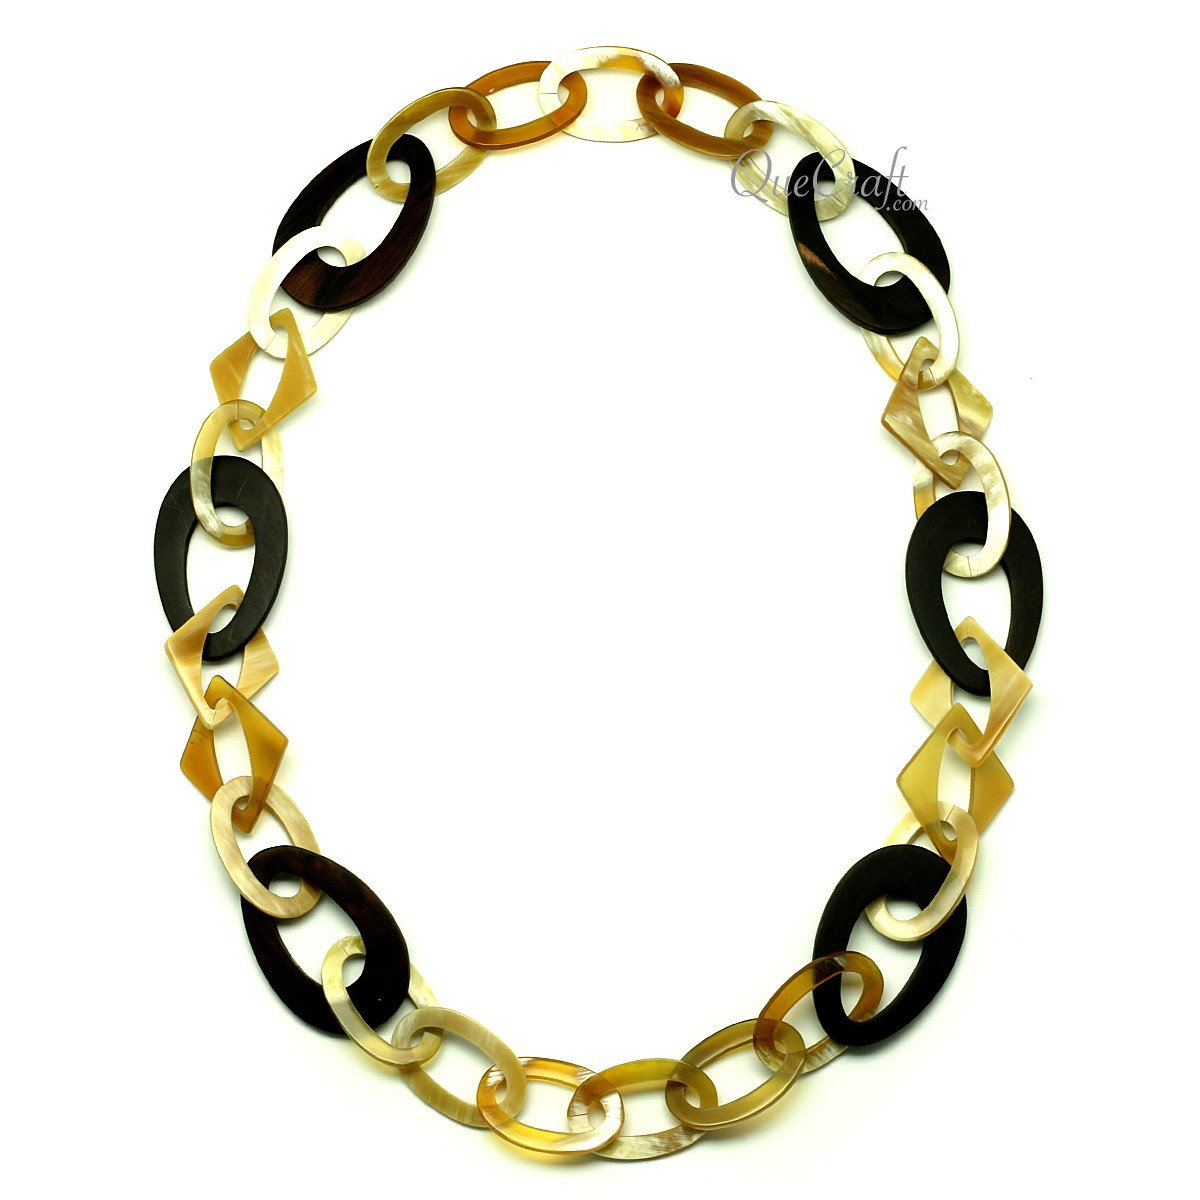 Ebony & Horn Chain Necklace #12804 - HORN JEWELRY